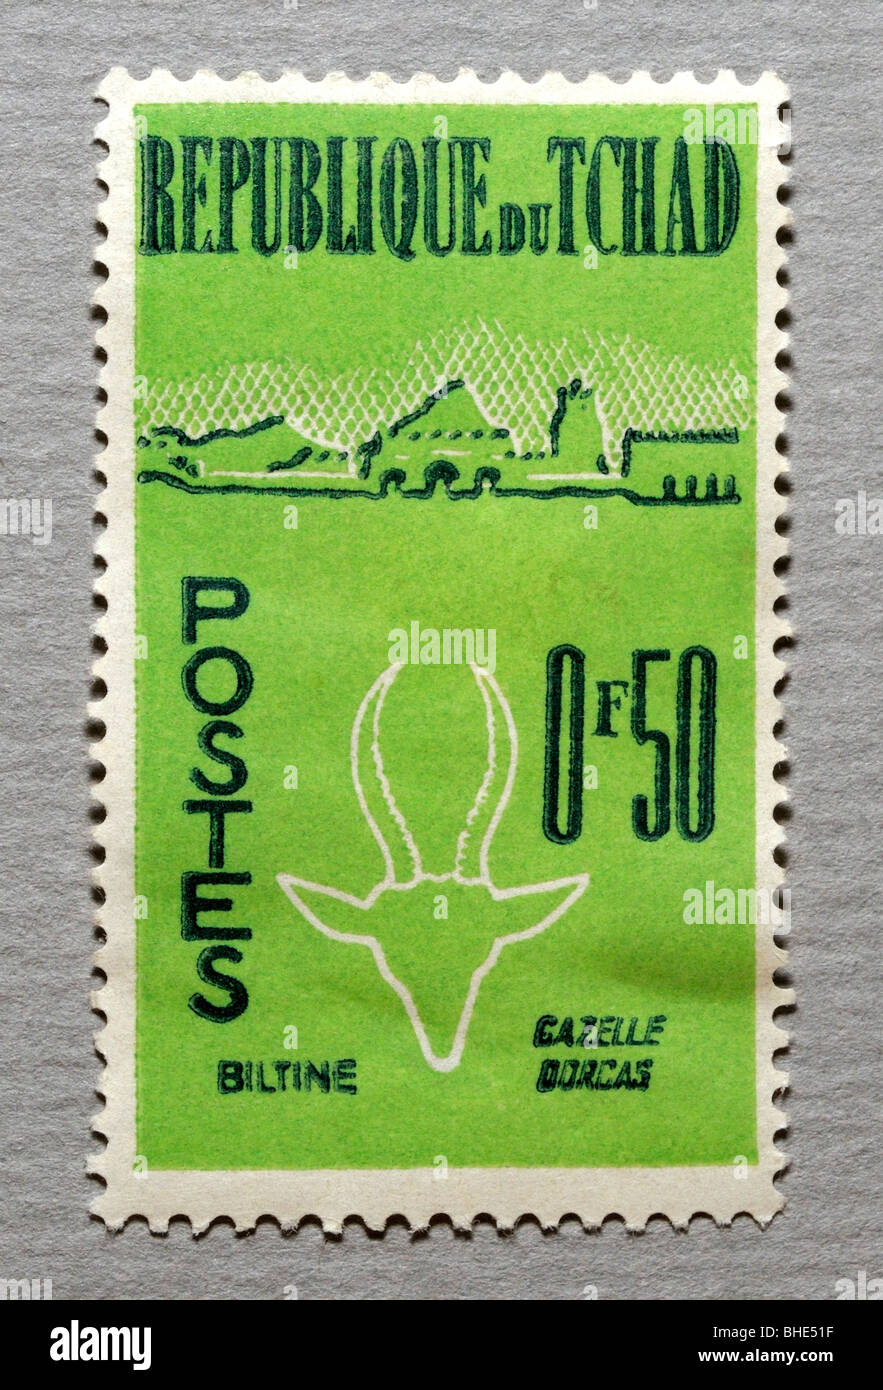 Republic of Chad Tchad Postage Stamp Stock Photo